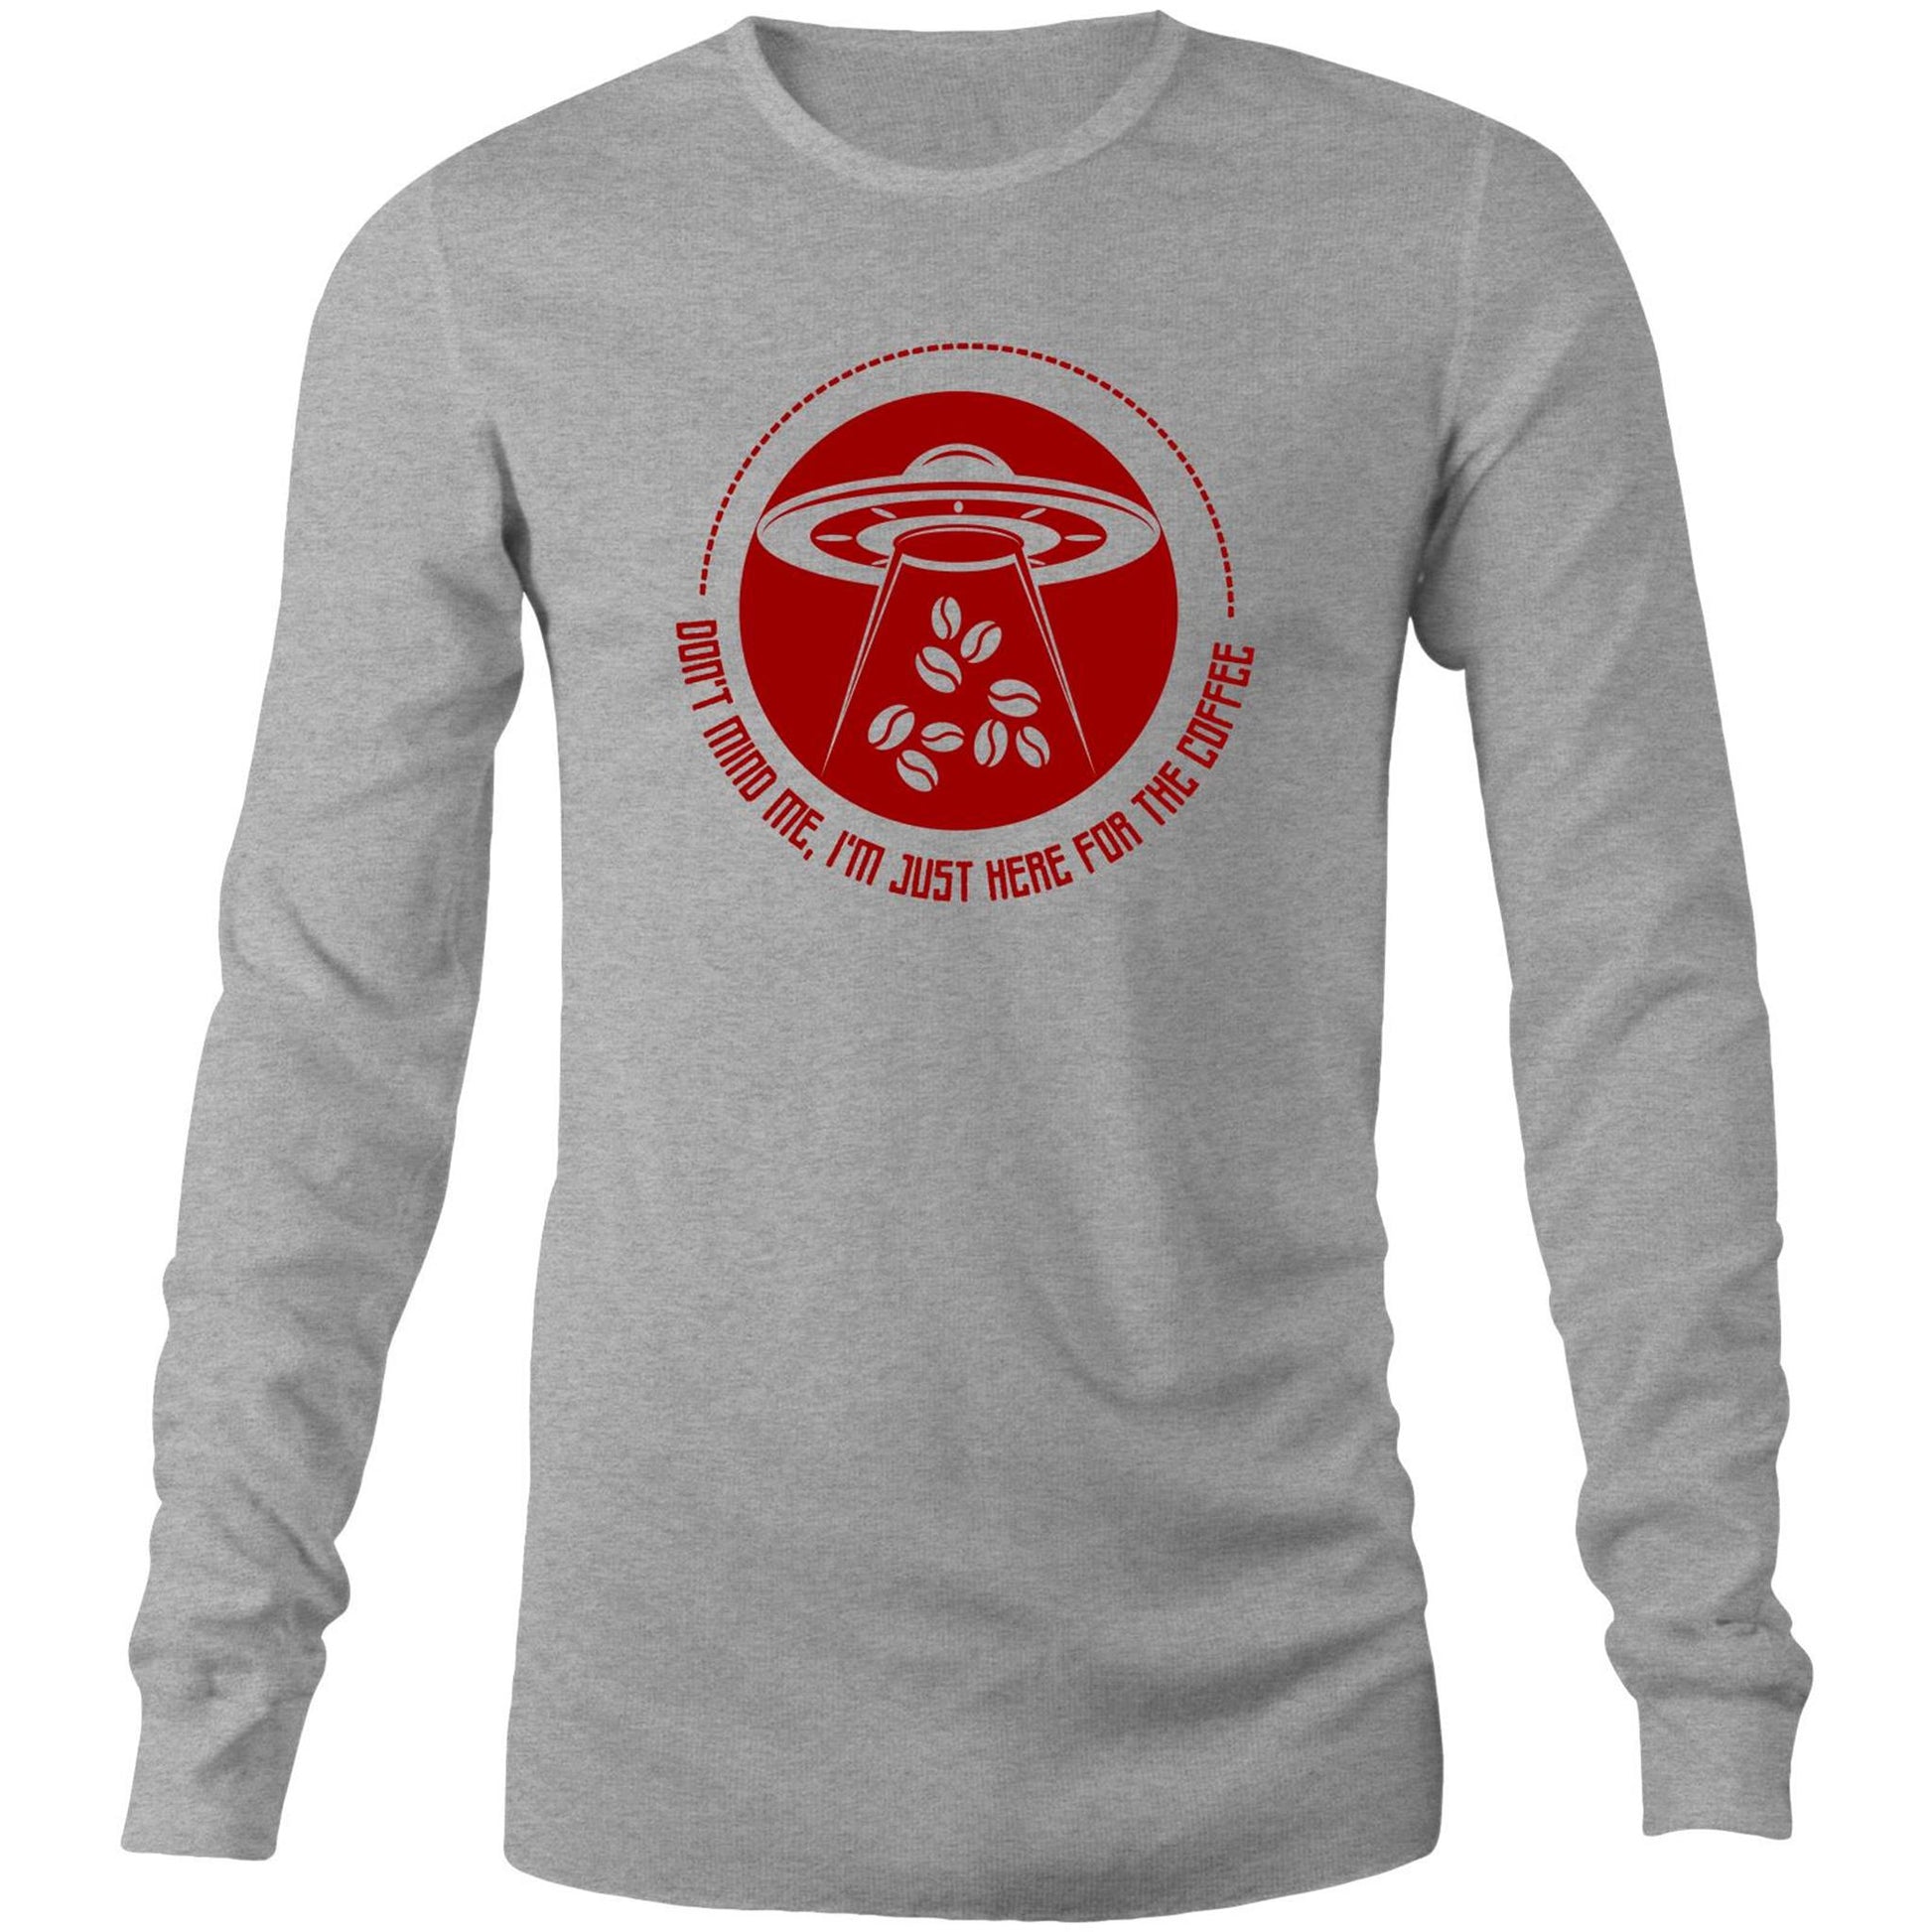 Don't Mind Me, I'm Just Here For The Coffee, Alien UFO - Mens Long Sleeve T-Shirt Grey Marle Unisex Long Sleeve T-shirt Coffee Sci Fi